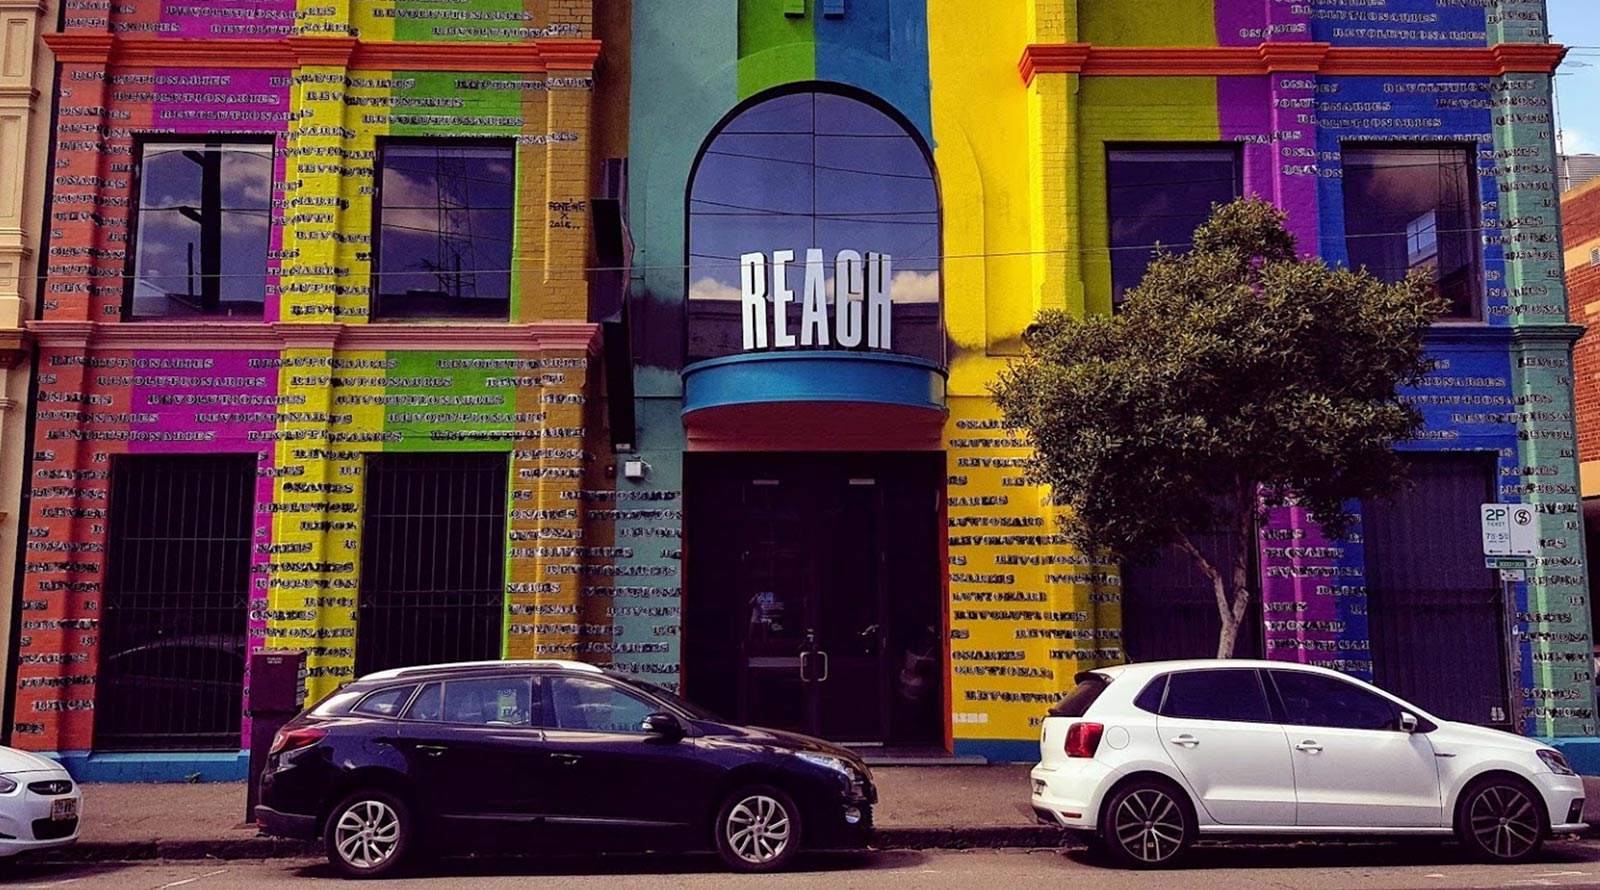 The Reach Dream Factory in Collingwood